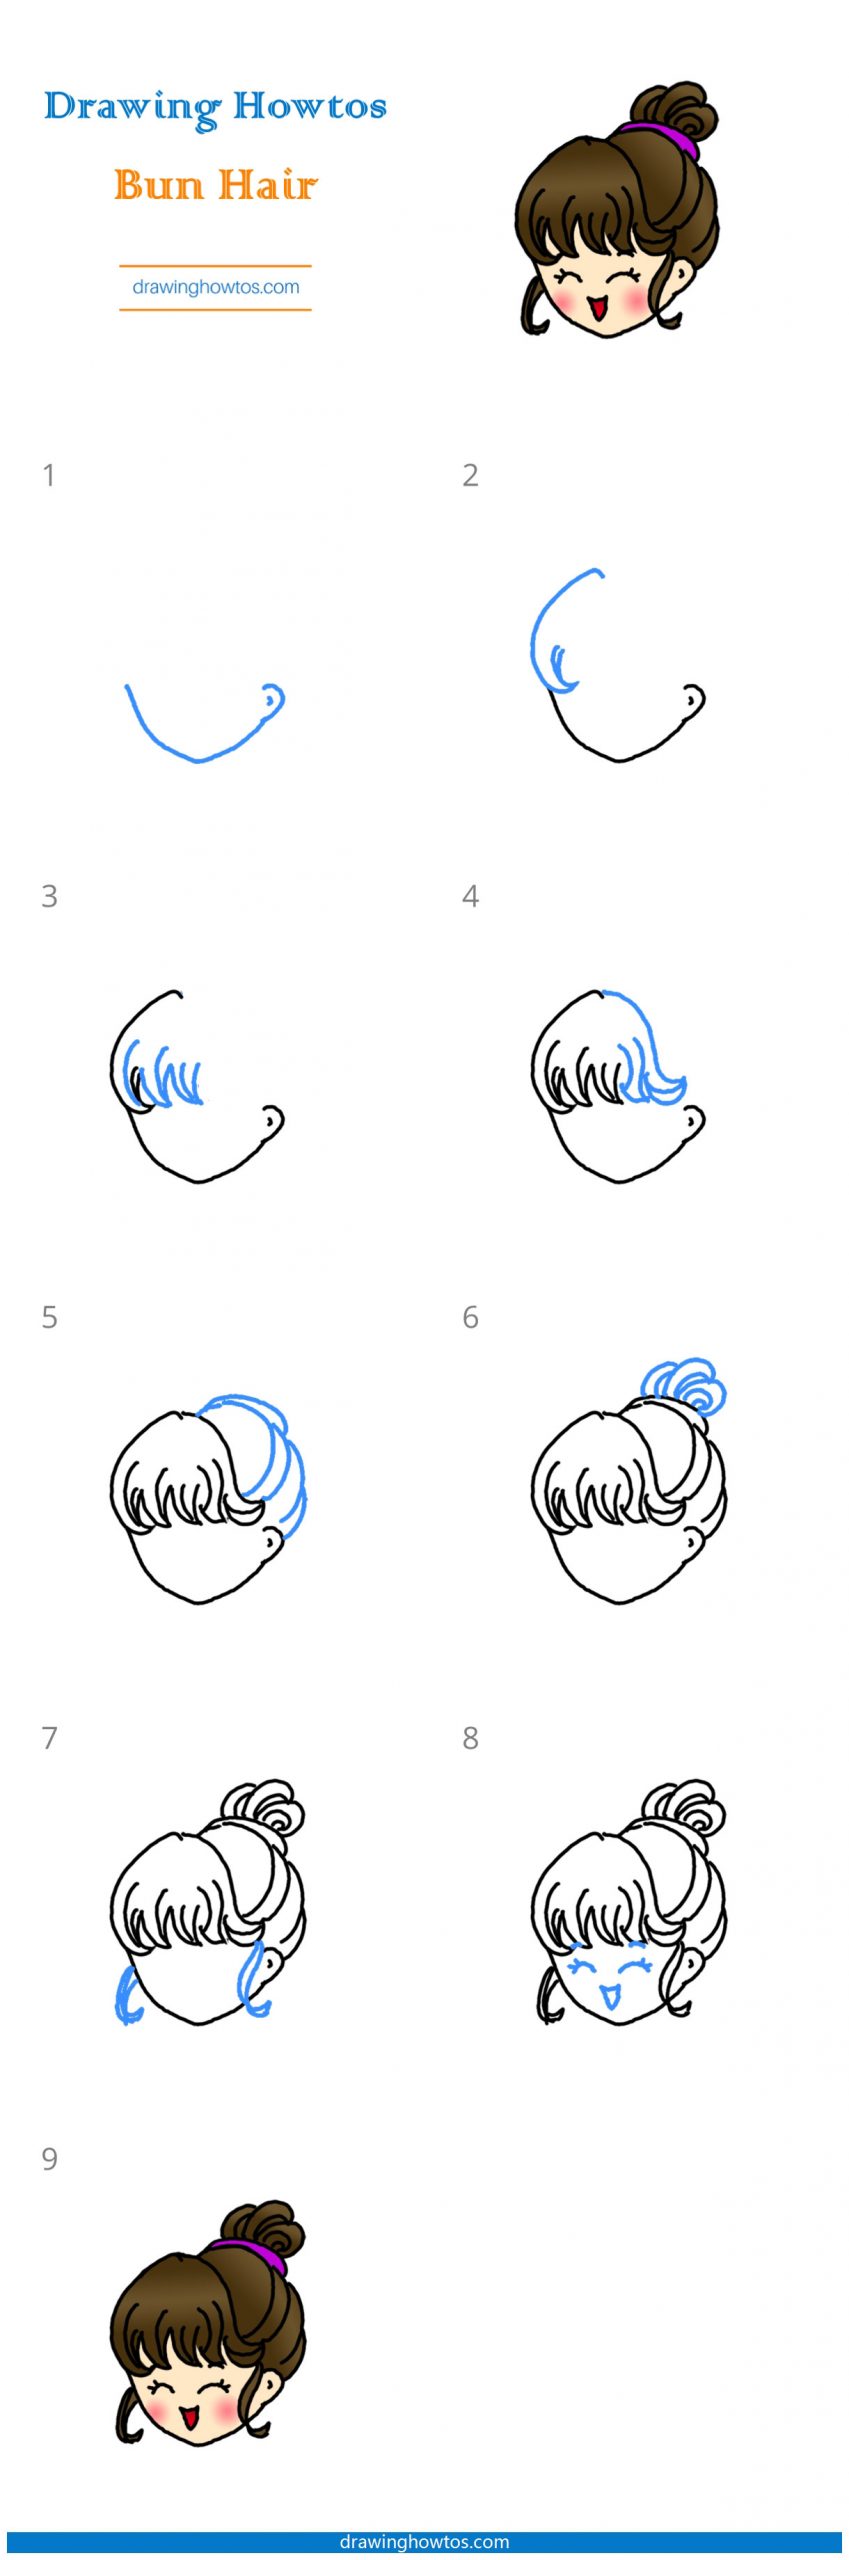 How to Draw Hair in a Bun Step by Step